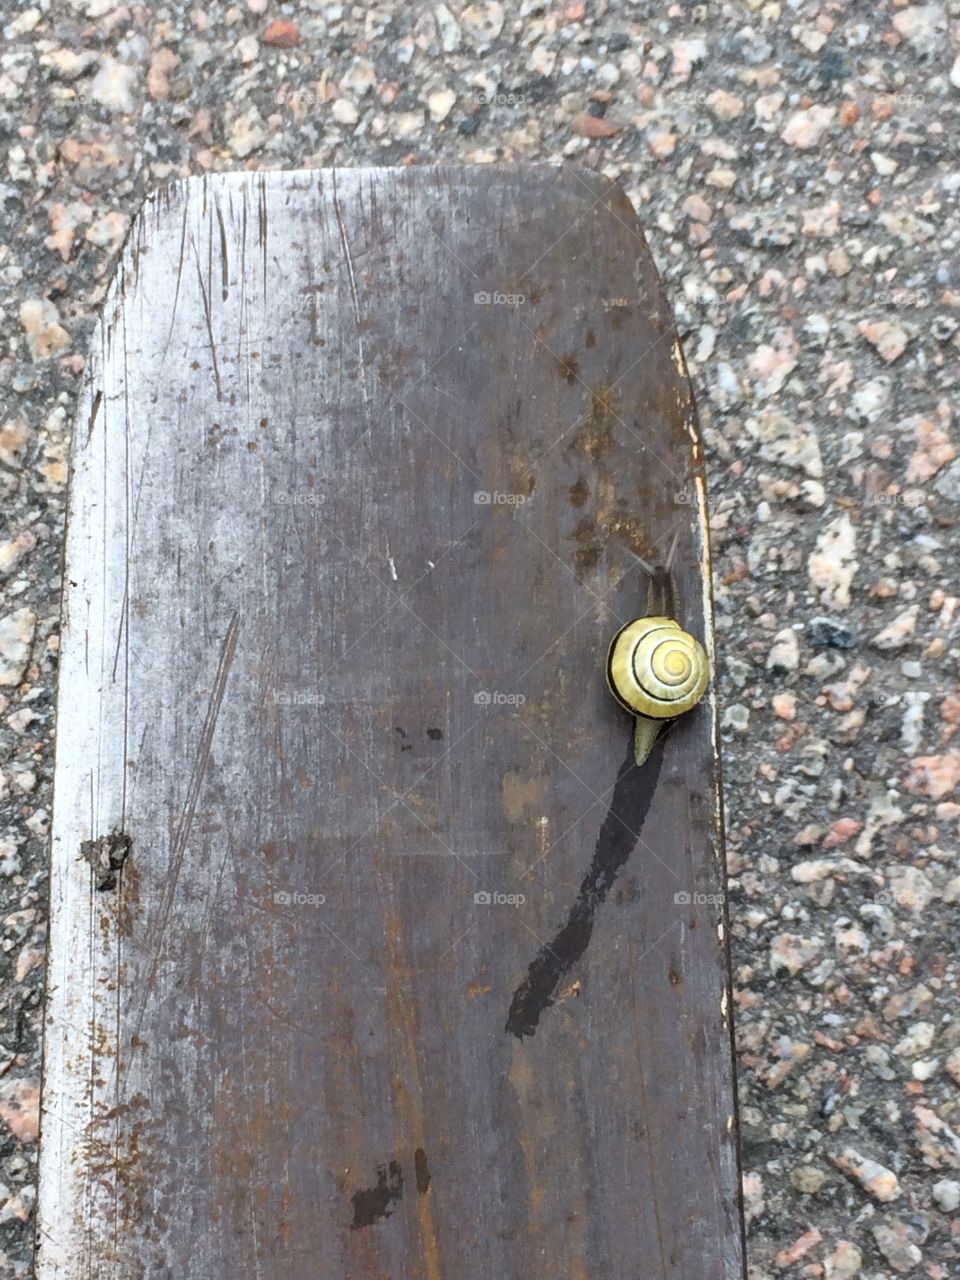 A snail with many lives. Came out from under a pallet that I just lifted with my forklift :P